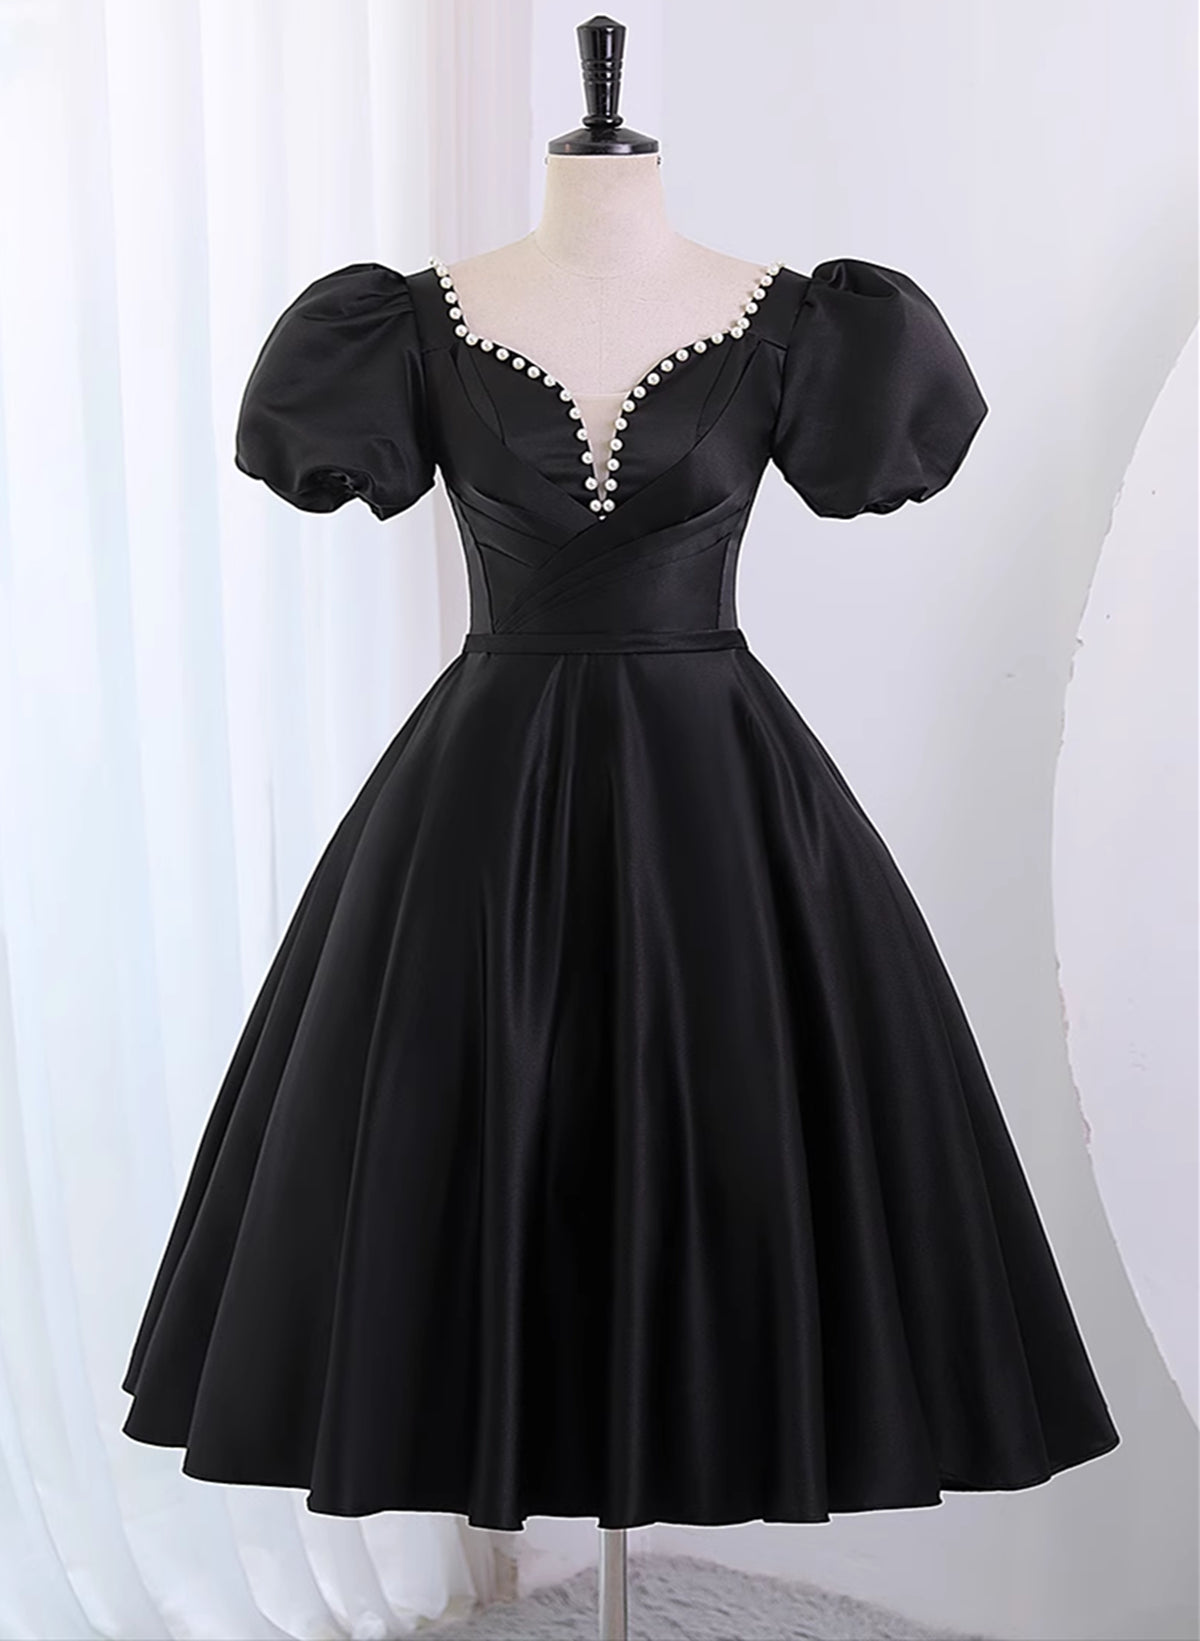 Black Satin Short Sleeves Knee Length Party Dress, Black Corset Homecoming Dress outfit, Bridesmaids Dressing Gowns